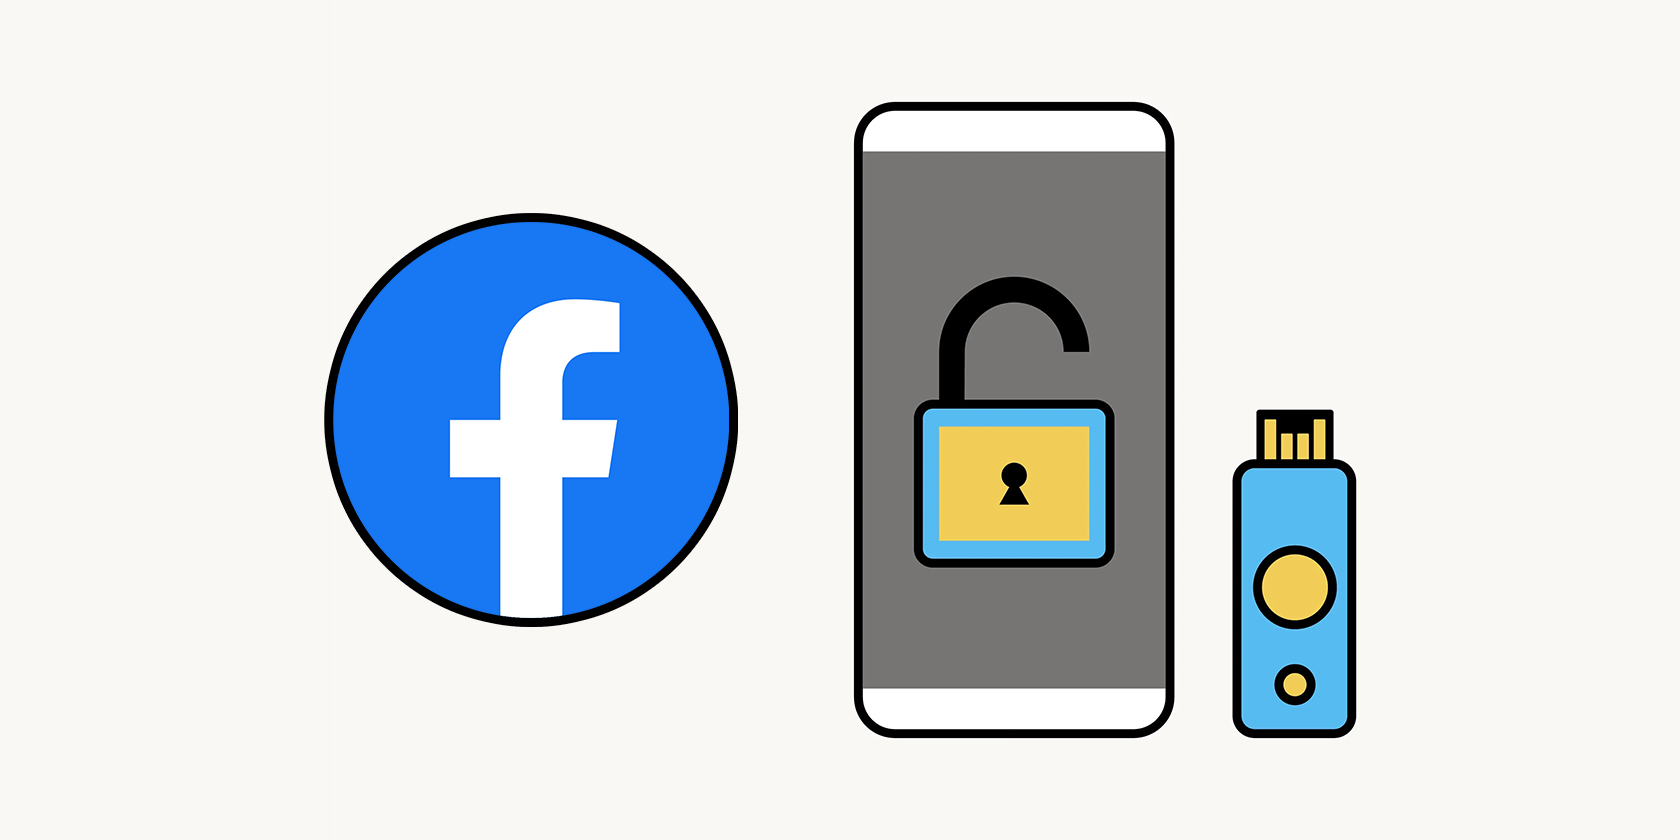 Vector graphic of the Facebook logo, mobile phone, and a security key